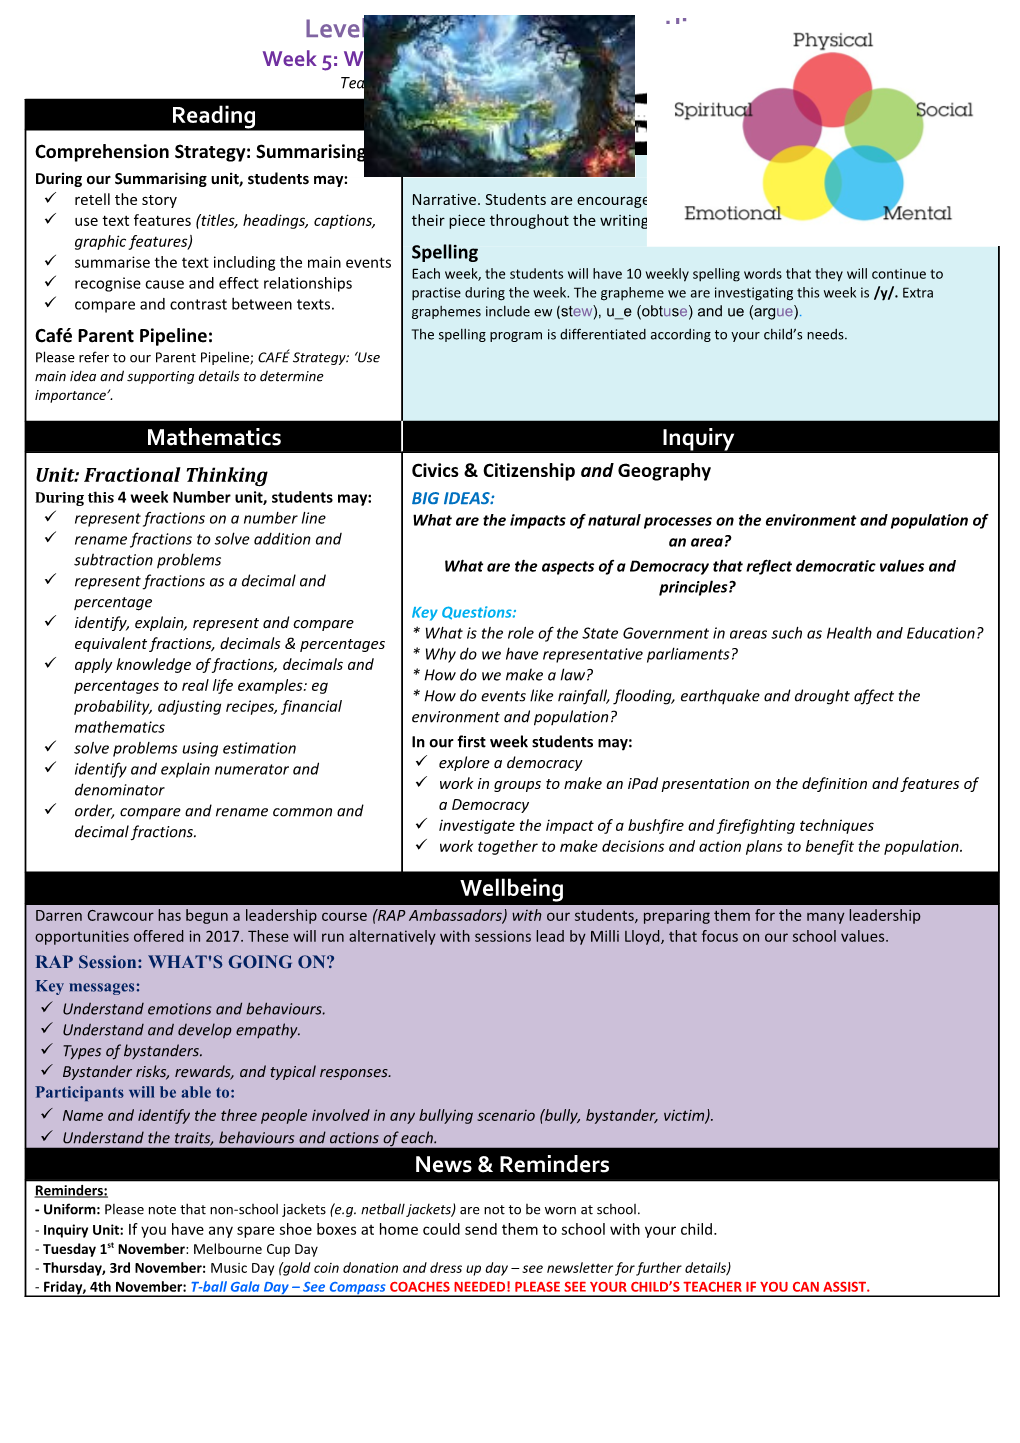 Level 5: Weekly Curriculum Outline